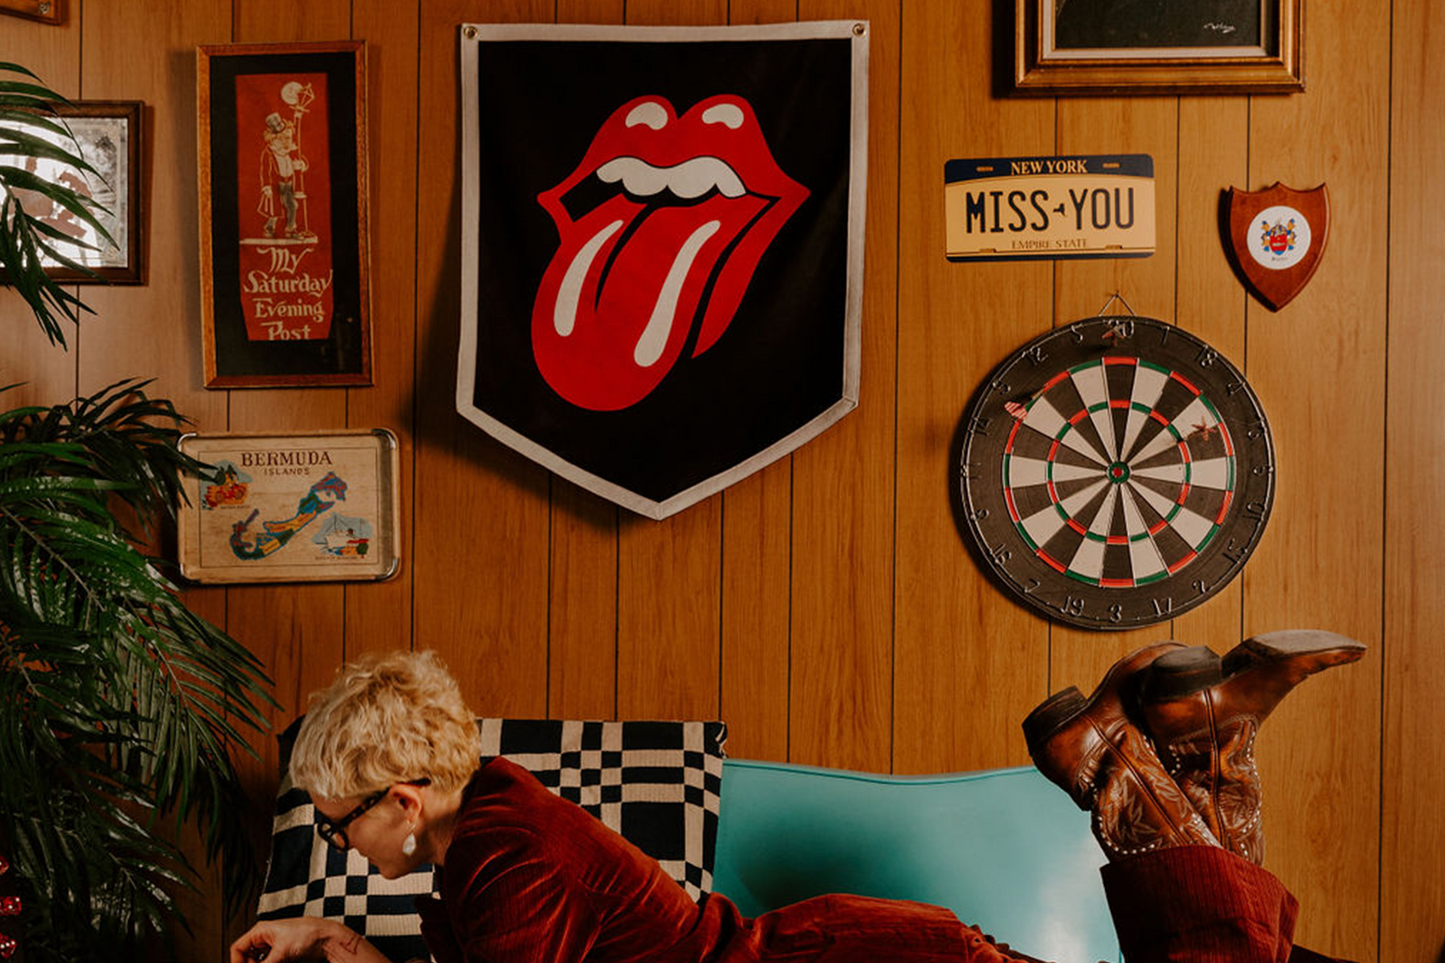 Lips Championship Banner • The Rolling Stones x Oxford Pennant